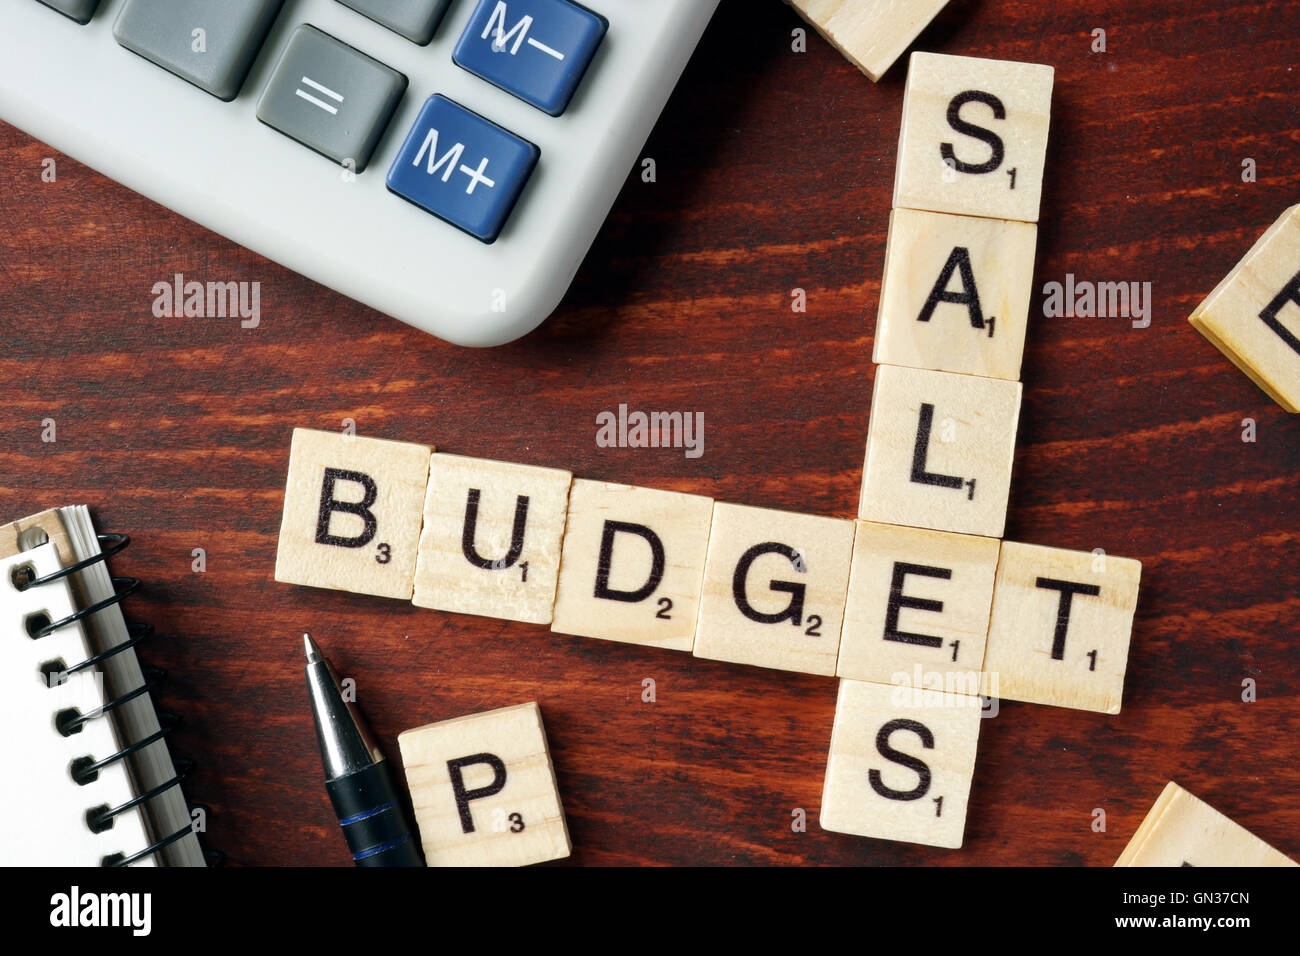 Words Sales Budget from wooden blocks with letters. Stock Photo